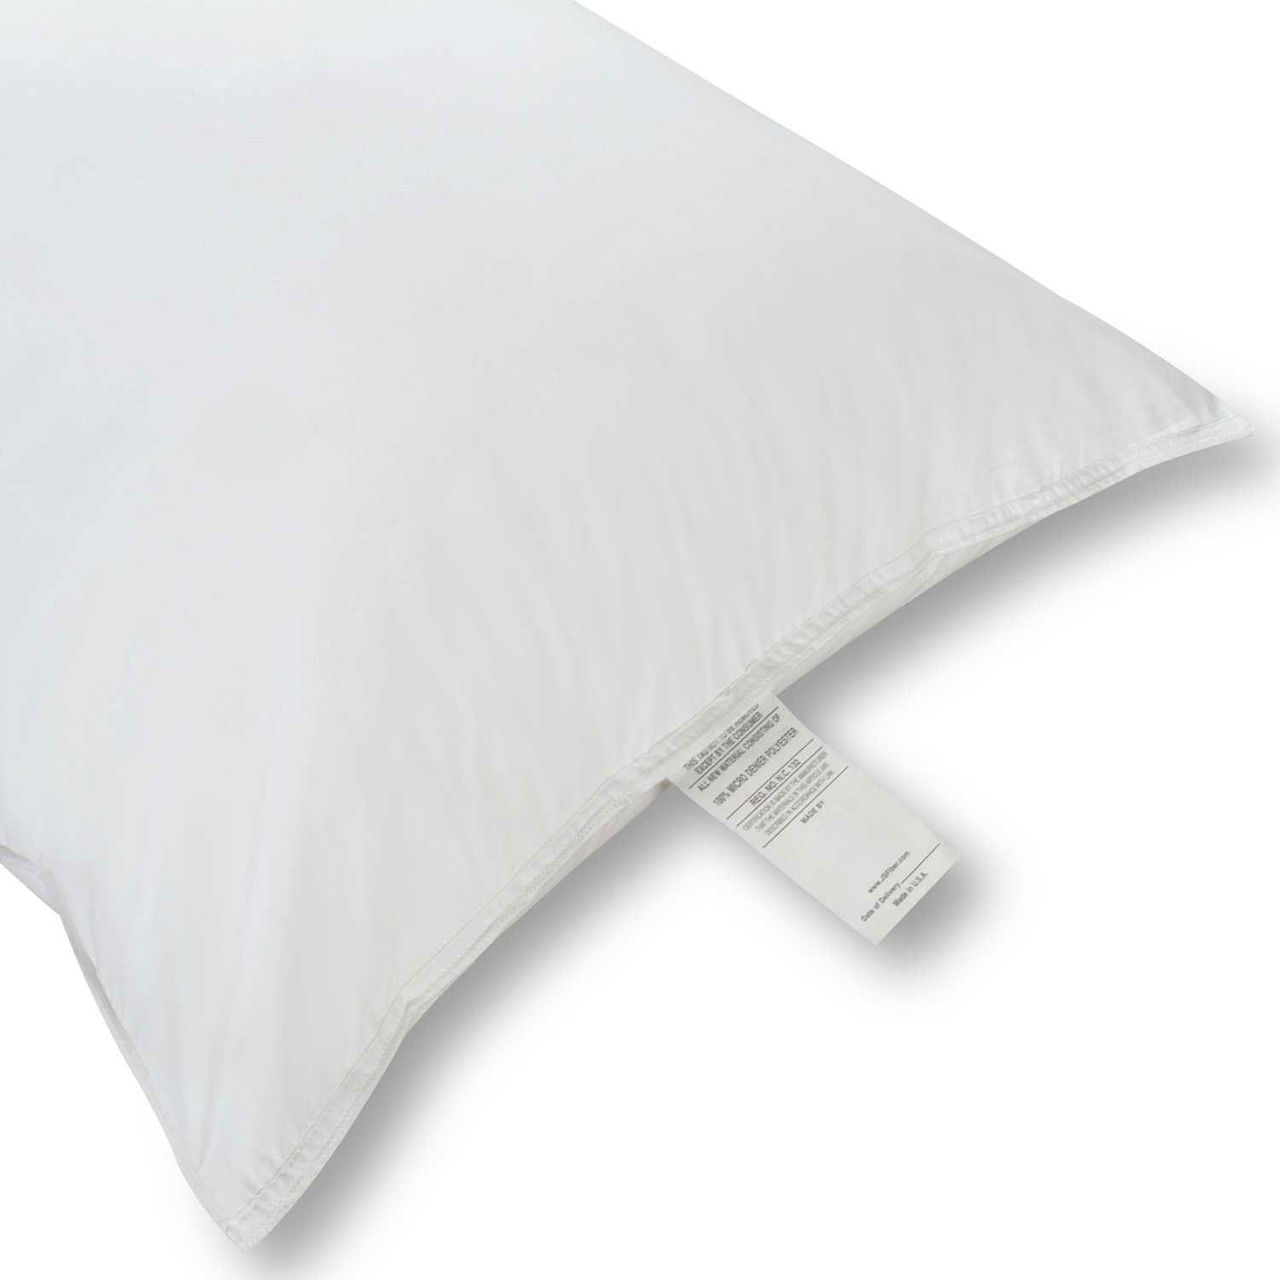 Does the Ultra Down Pillow serve as a quality substitute for natural fill pillows?